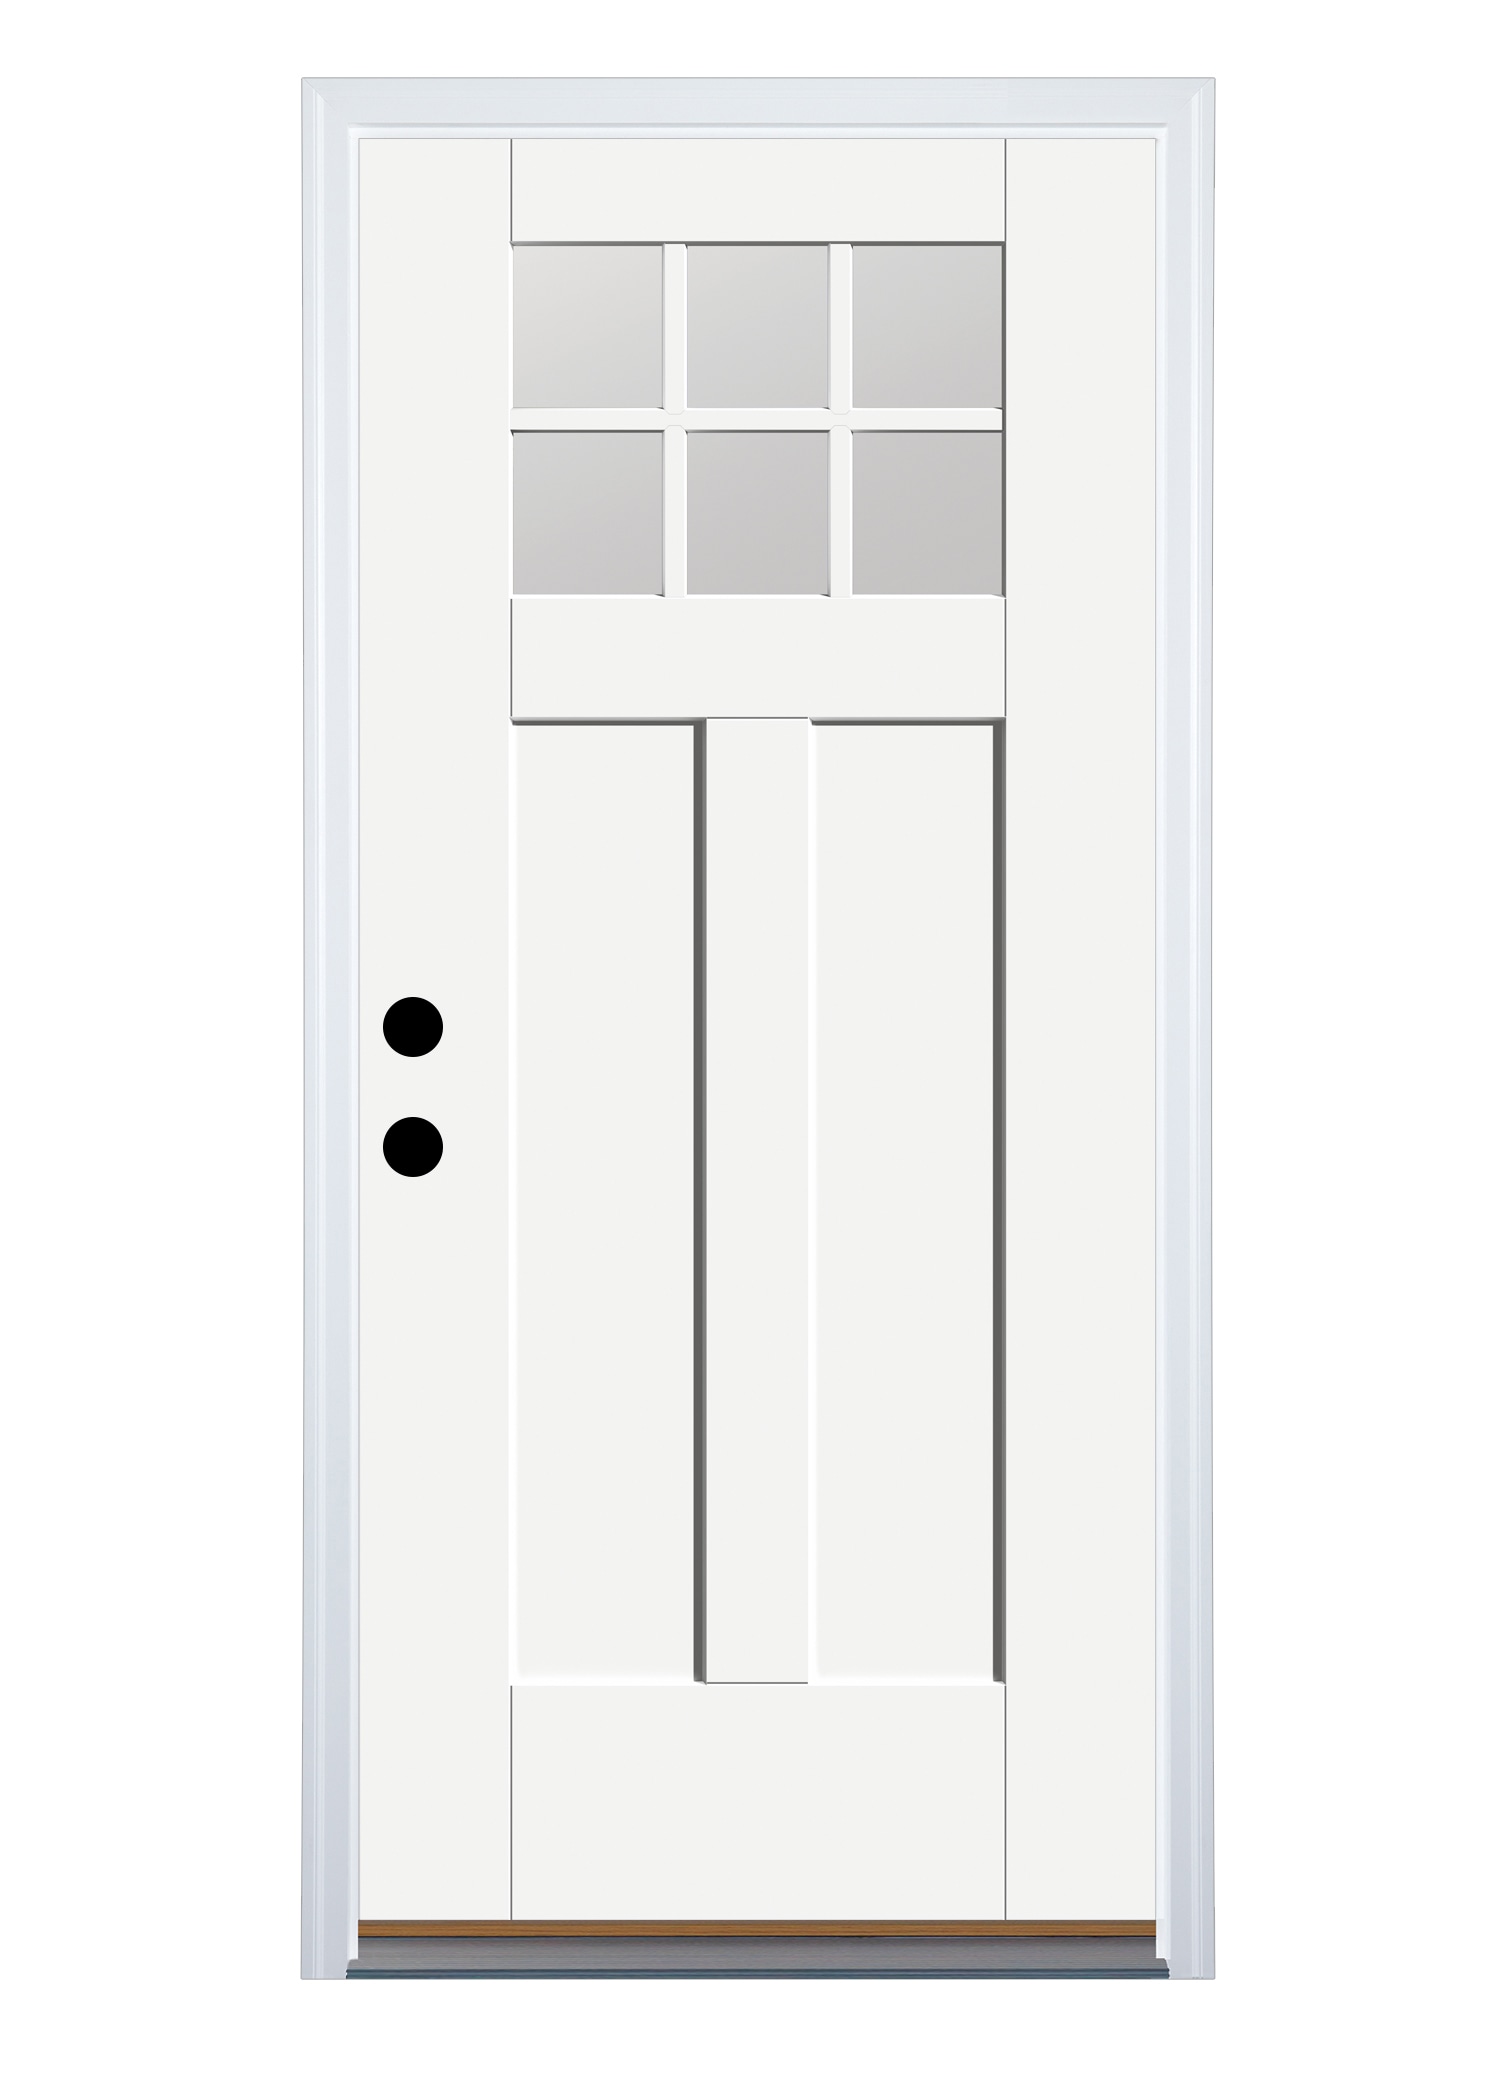 Therma-Tru Benchmark Doors Shaker 36-in x 80-in Fiberglass Craftsman Right-Hand Inswing Ready To Paint Prehung Single Front Door with Brickmould -  BMTT626371